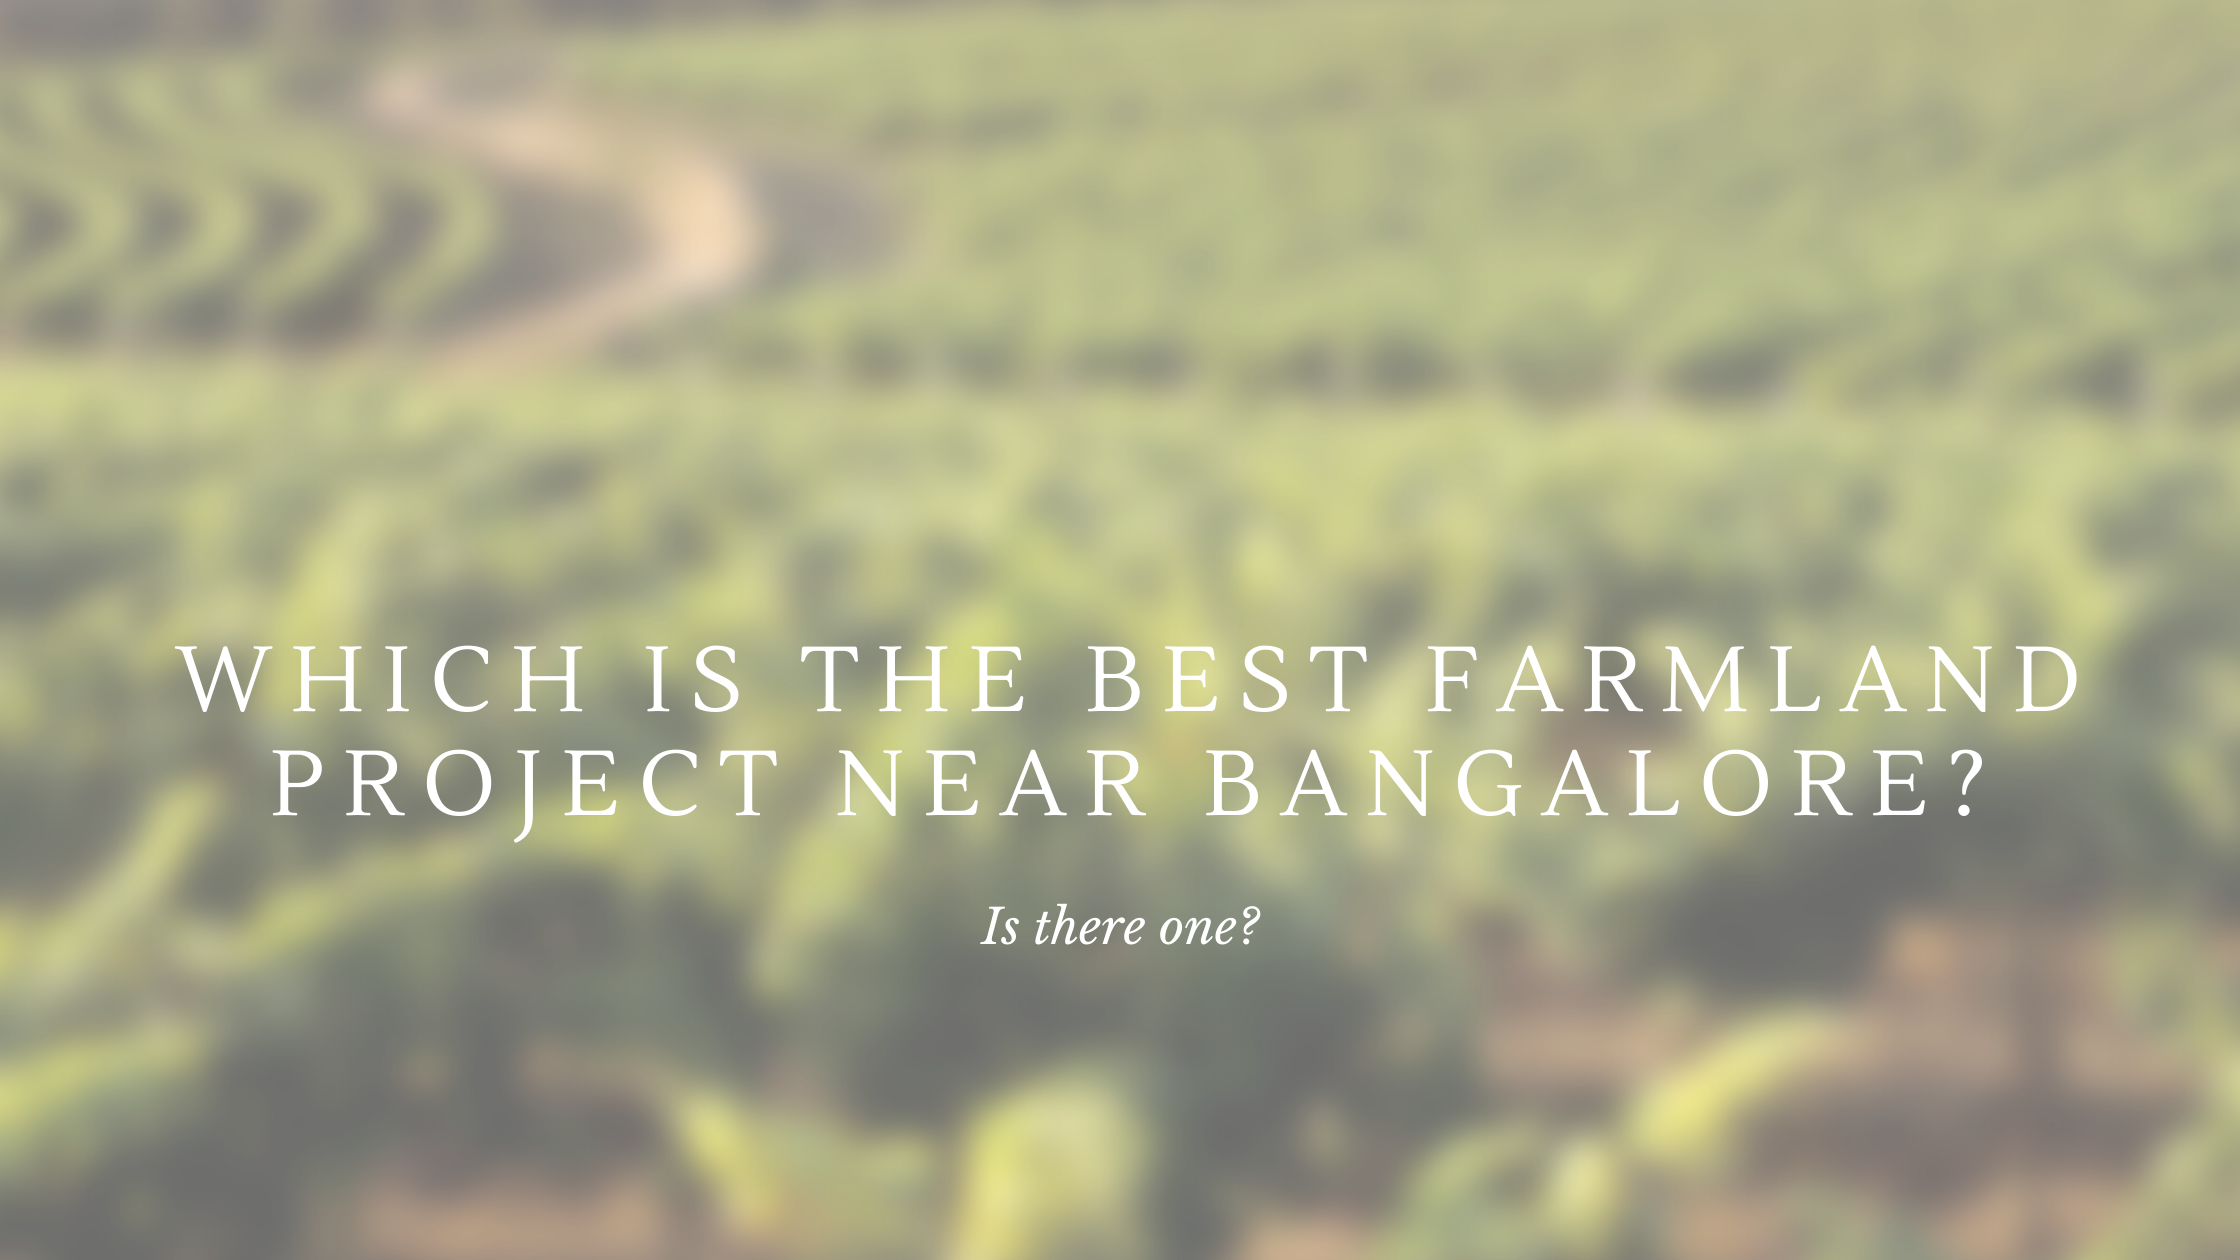 Which is the best farmland near Bangalore?